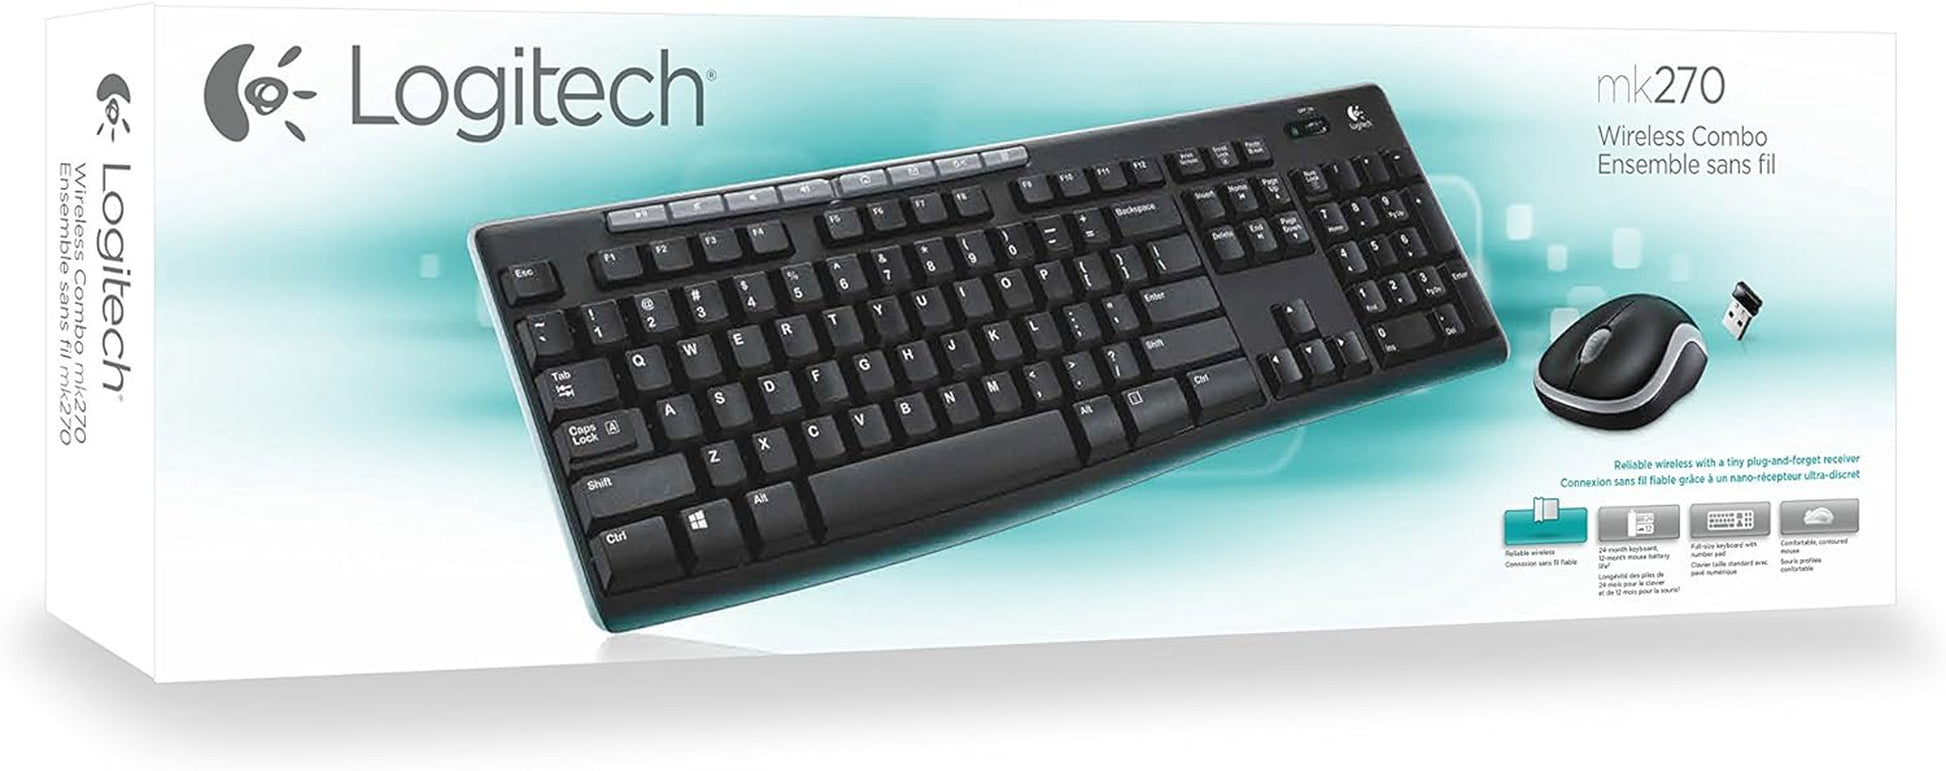 "Enhance Your Workstation with MK270 Wireless Keyboard and Mouse Combo - Long Battery Life, Compact Design, and Convenient Multimedia Keys - Perfect for PC and Laptop Users!"